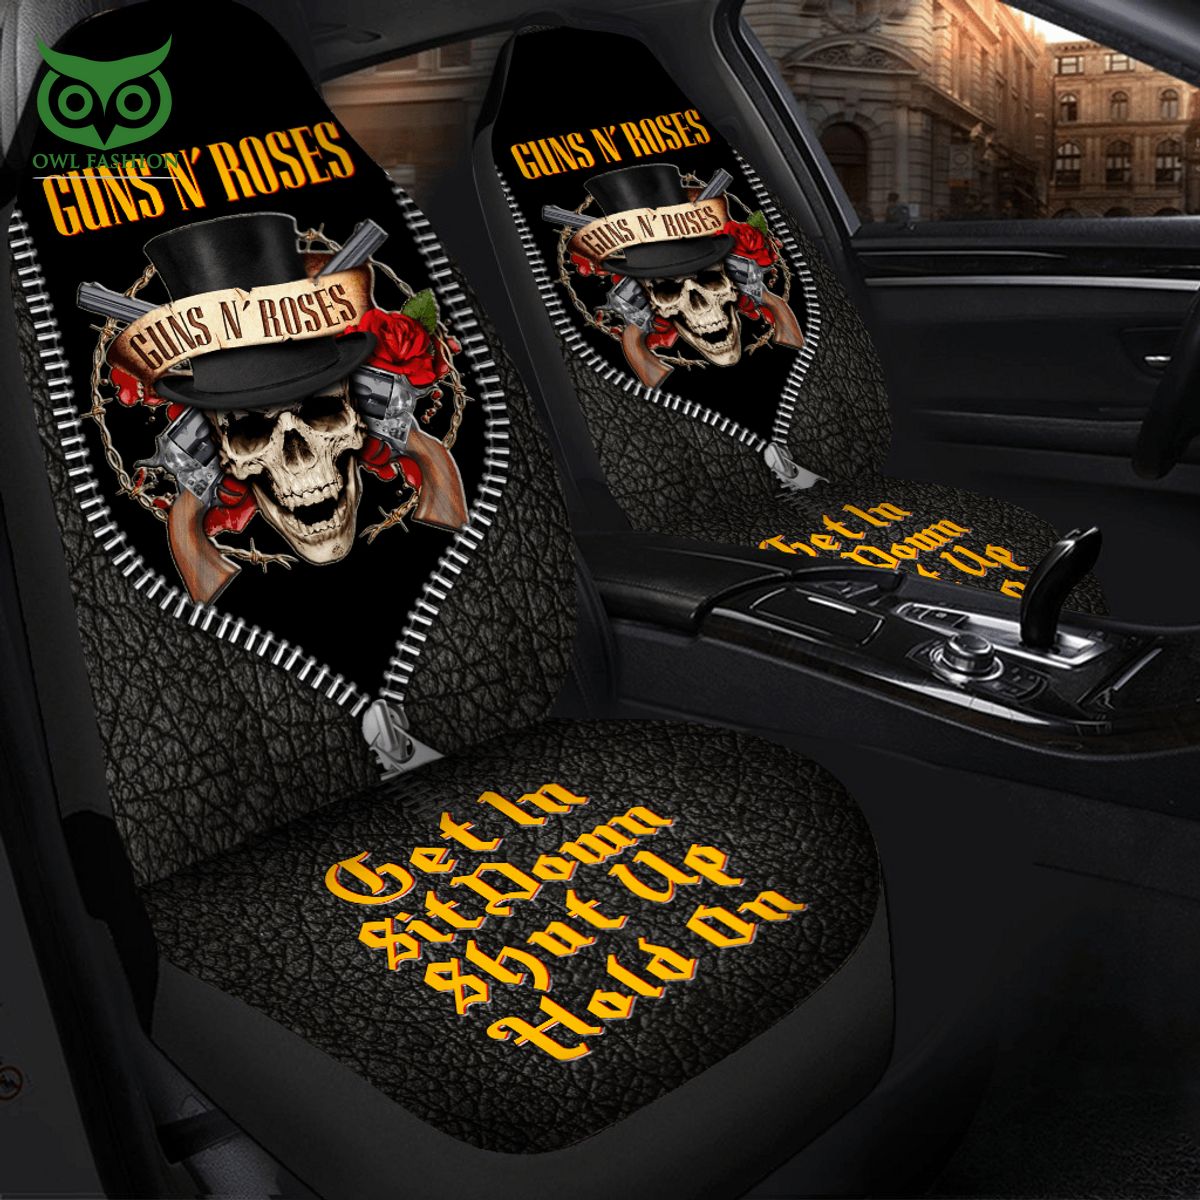 Guns N Roses Premium Leather Car Seat Cover Eye soothing picture dear